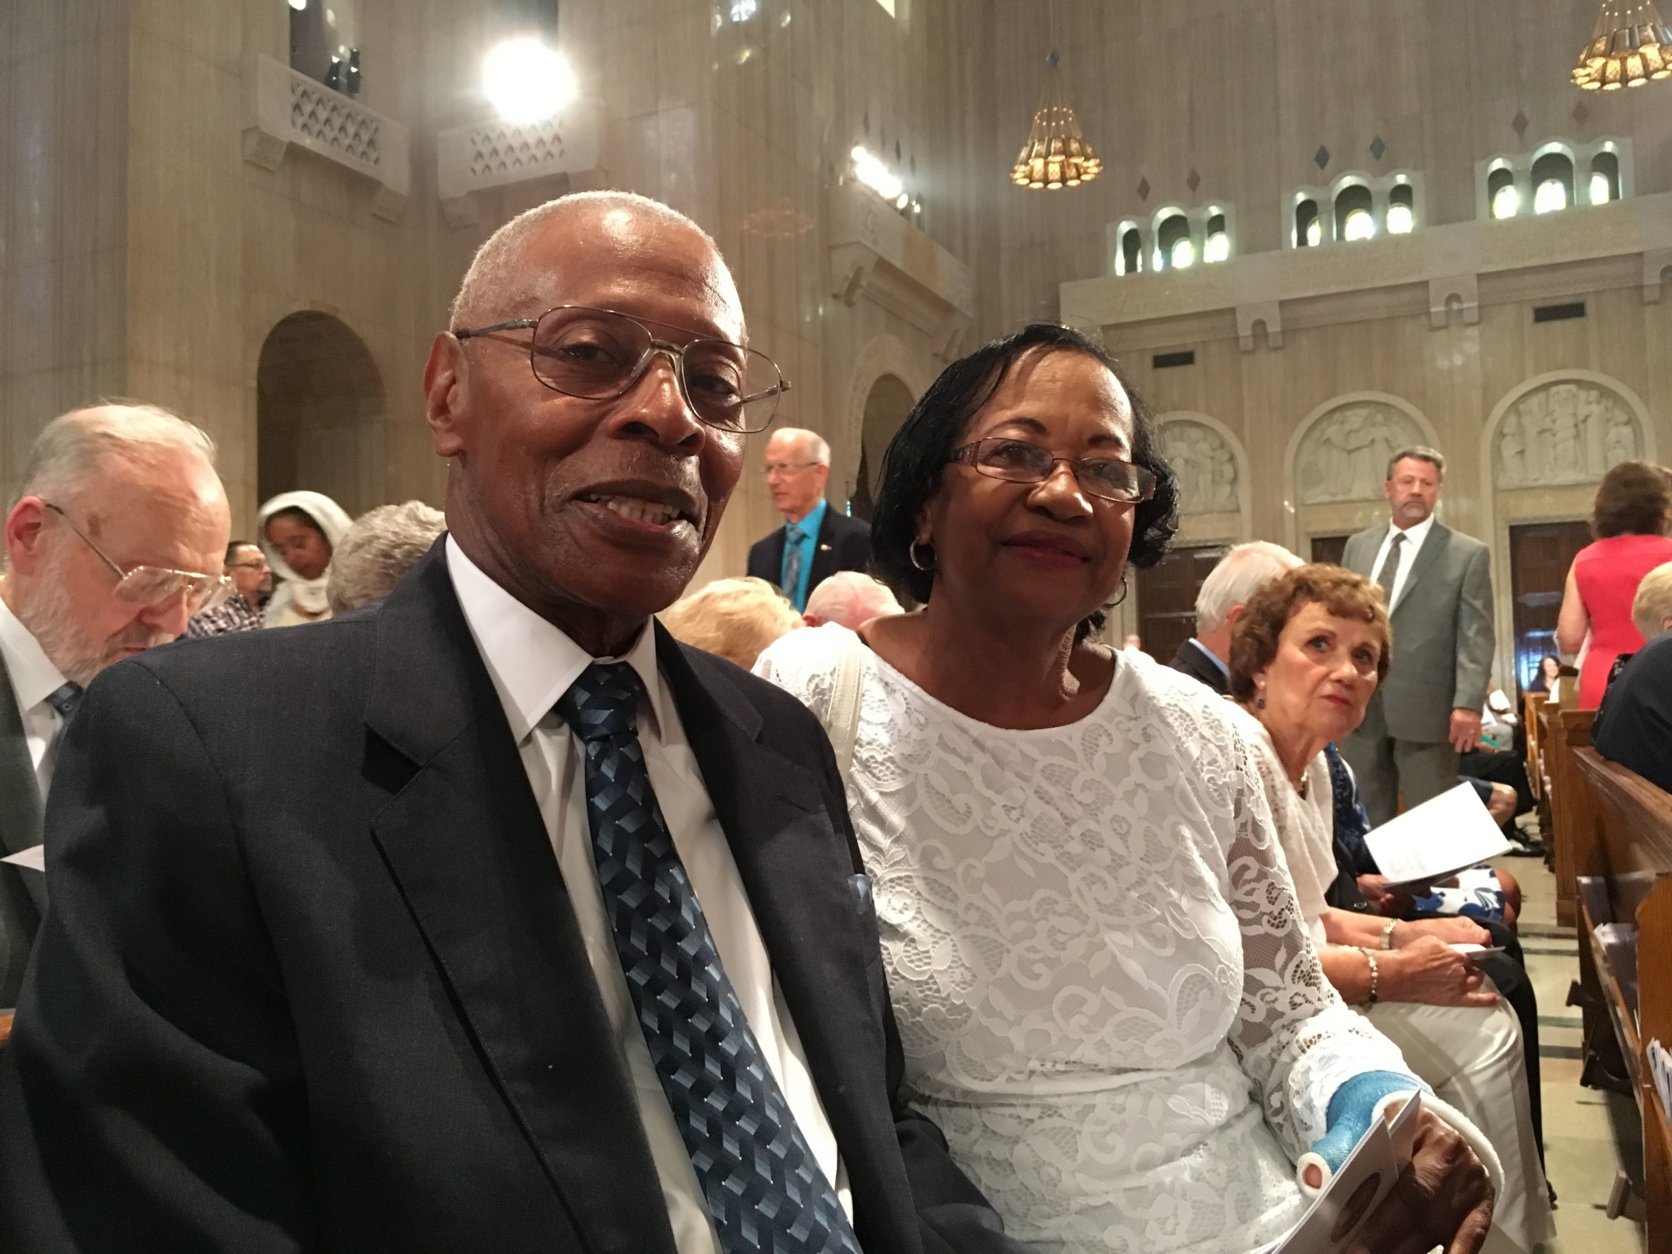 A special mass at the Basilica of the National Shrine of the Immaculate Conception honored couples throughout the Archdiocese of Washington, most who have been married a range of years— from at least 25 years, up to 75 years of marriage. (WTOP/Liz Anderson)